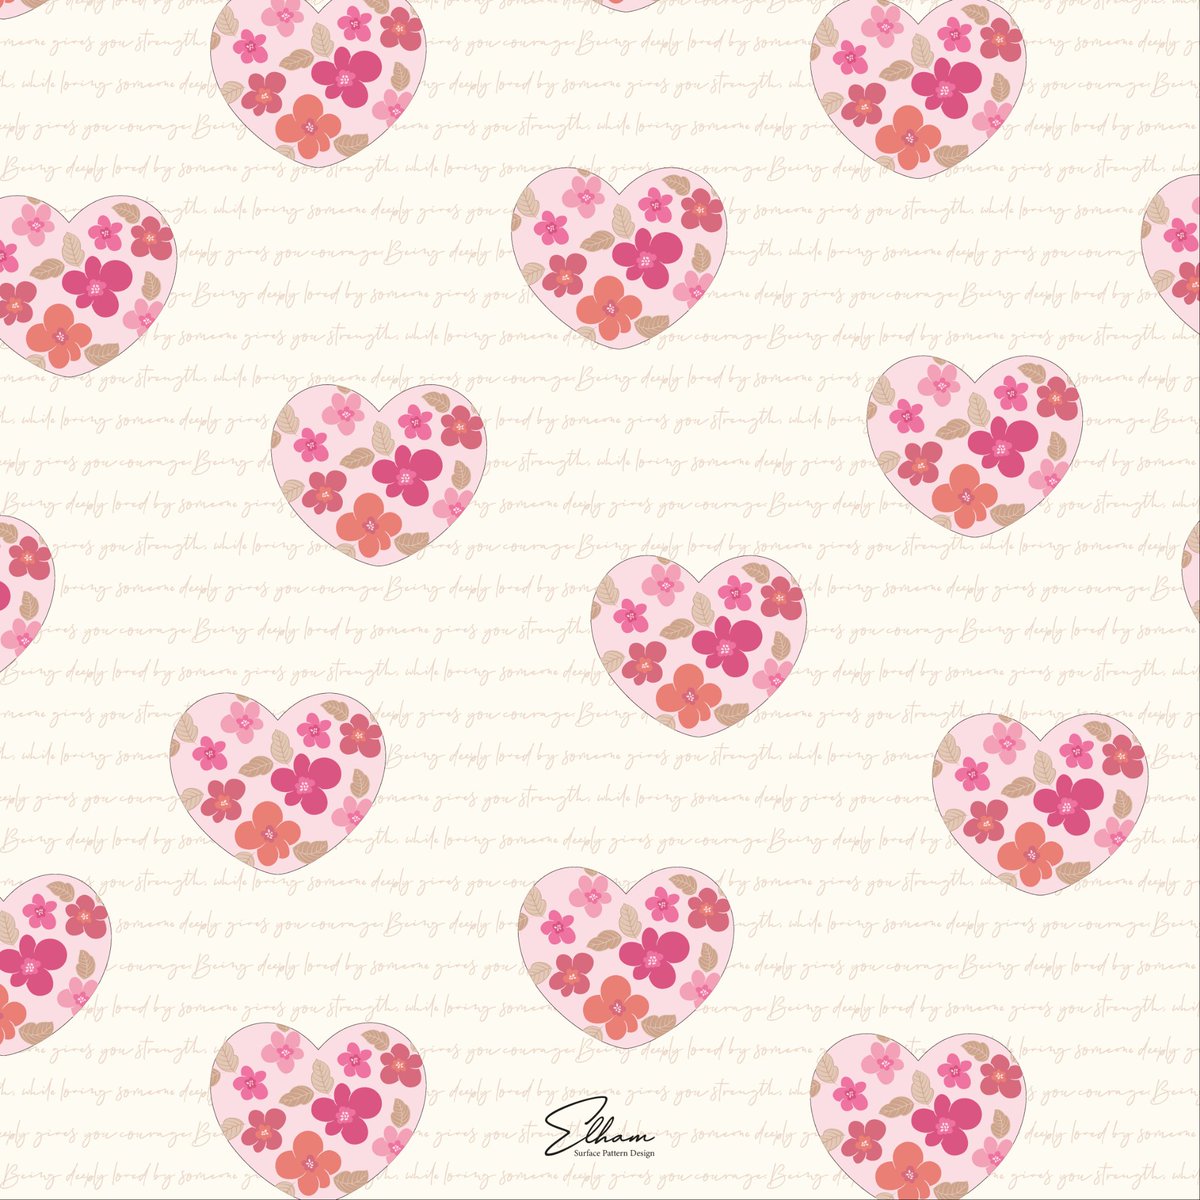 Last part of my surface pattern collection with valentine theme is available. 💕
#ValentinesDay, #fabricdesigner
#surfacepatterndesign
#patterndesigner, #printdesigner
#textileindustry, #textiledesigner
#illustrationartist